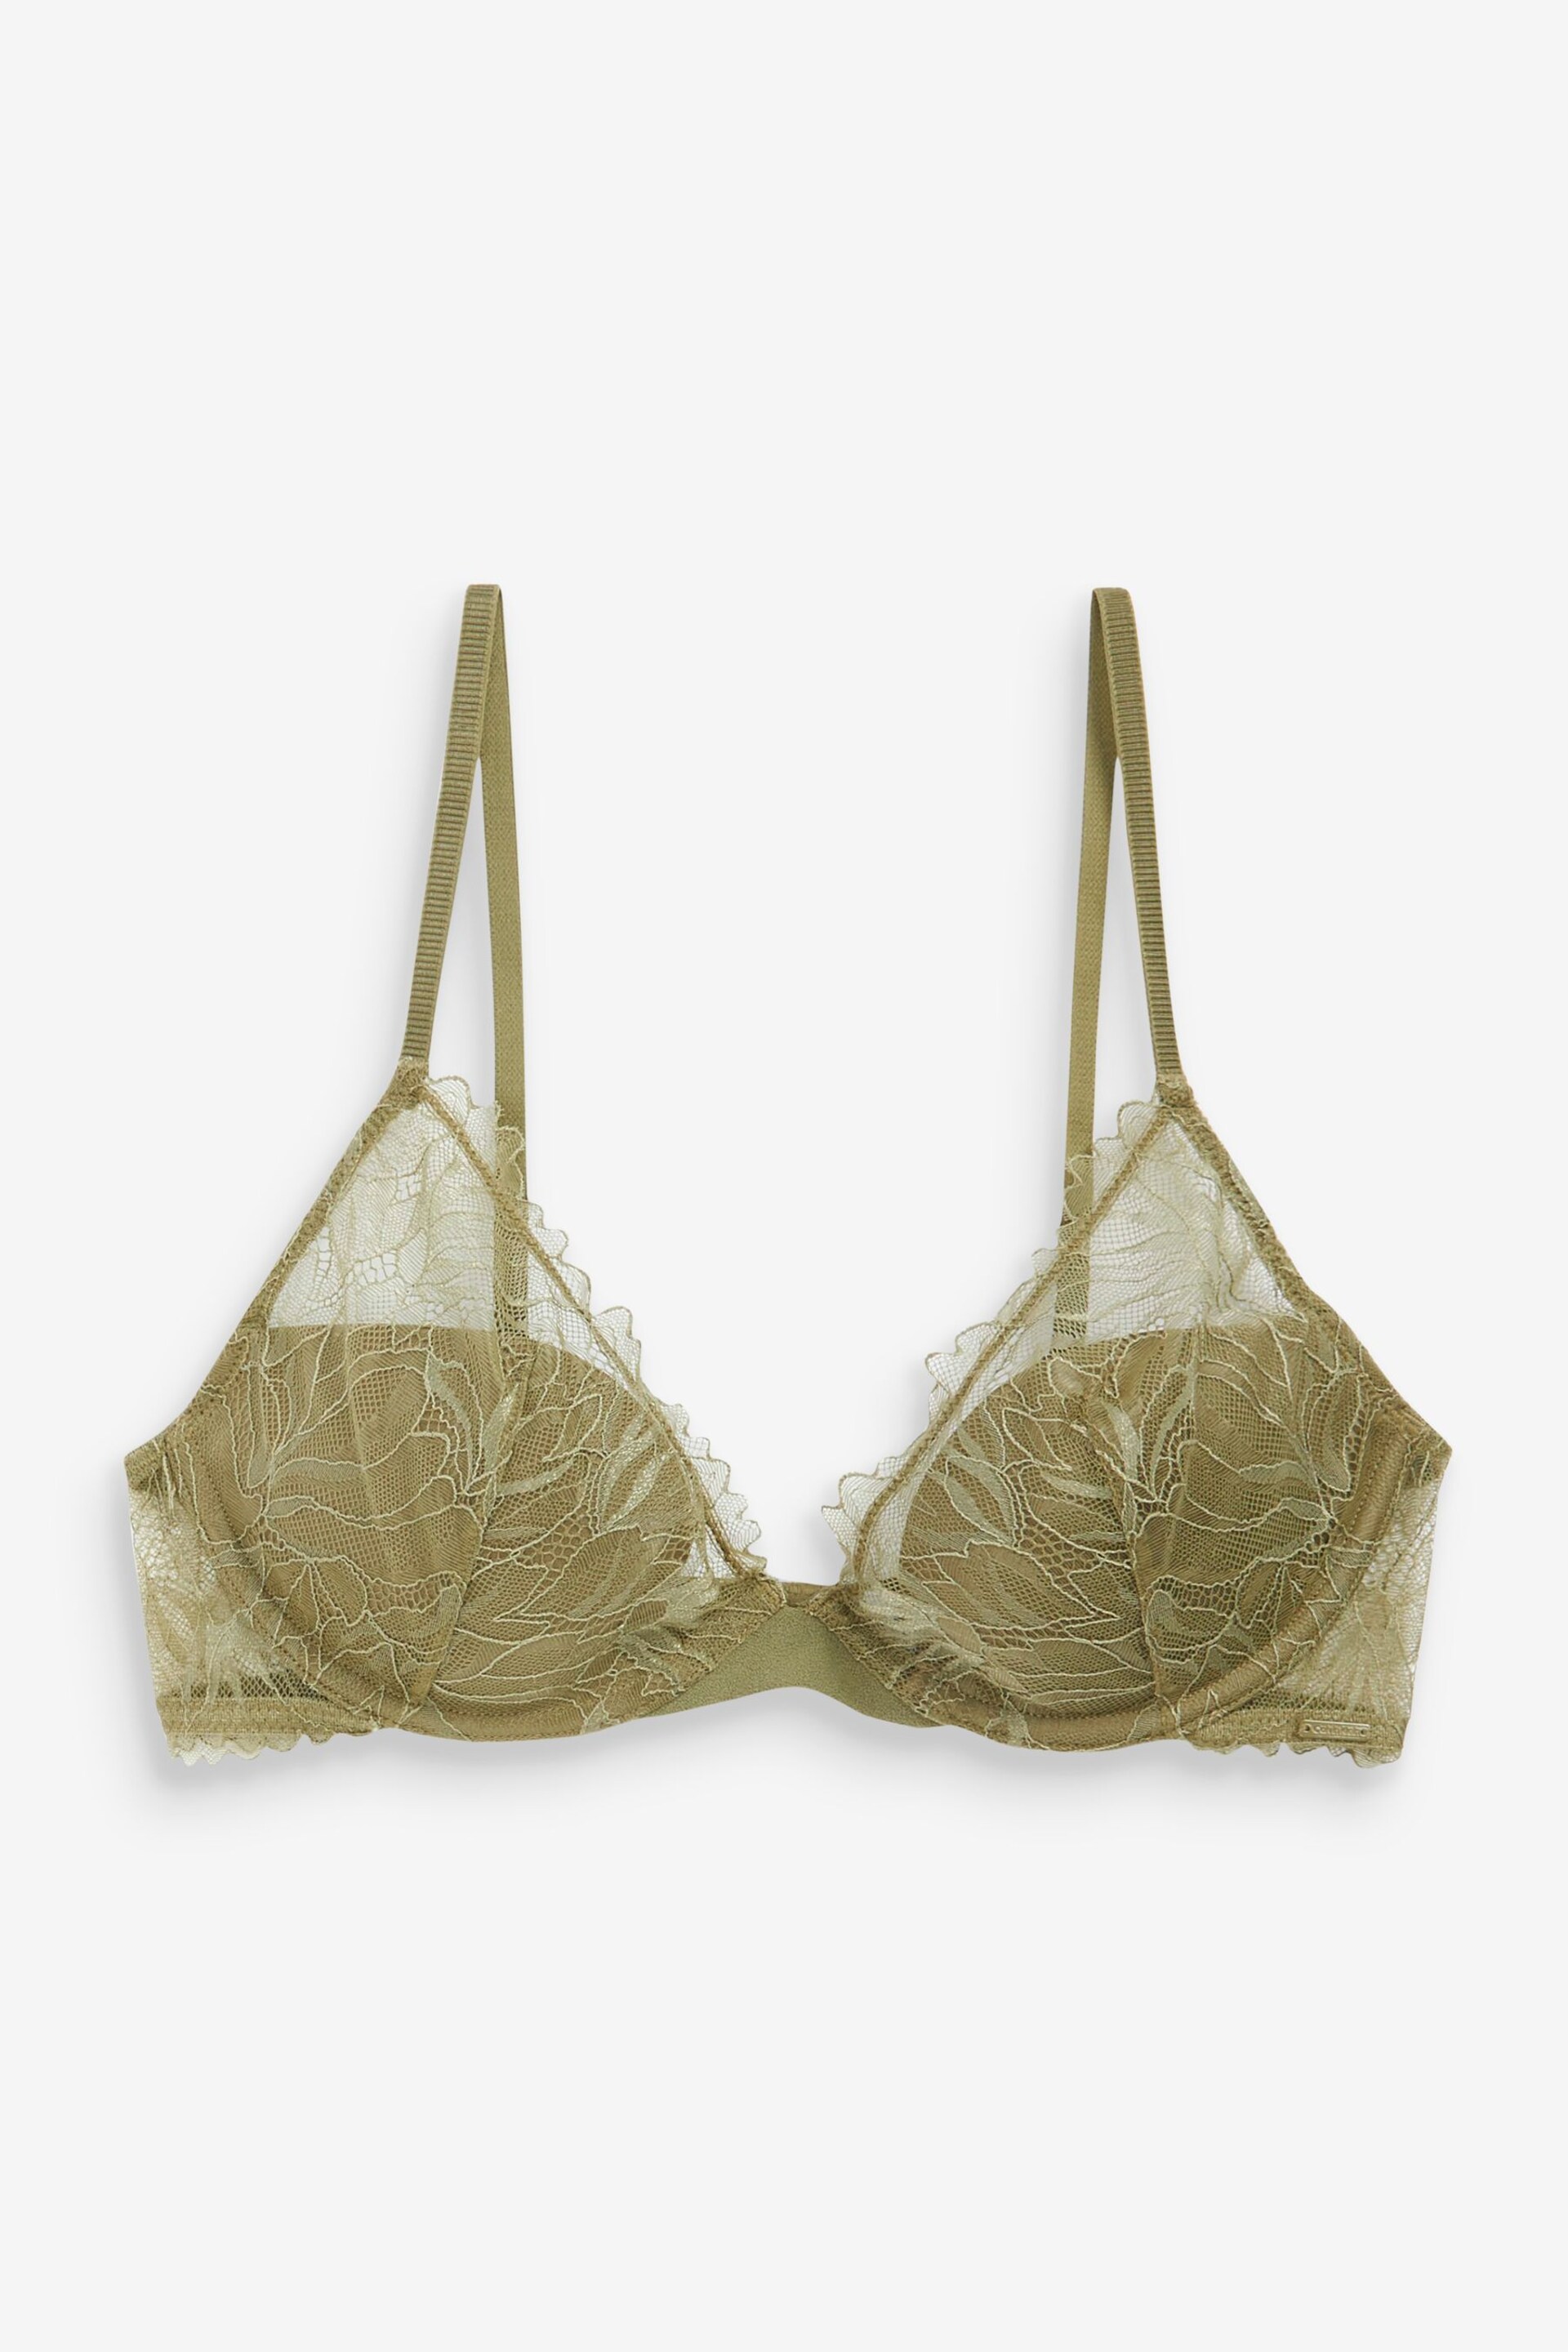 Calvin Klein Green Floral Lace Plunge Bra - Image 5 of 5